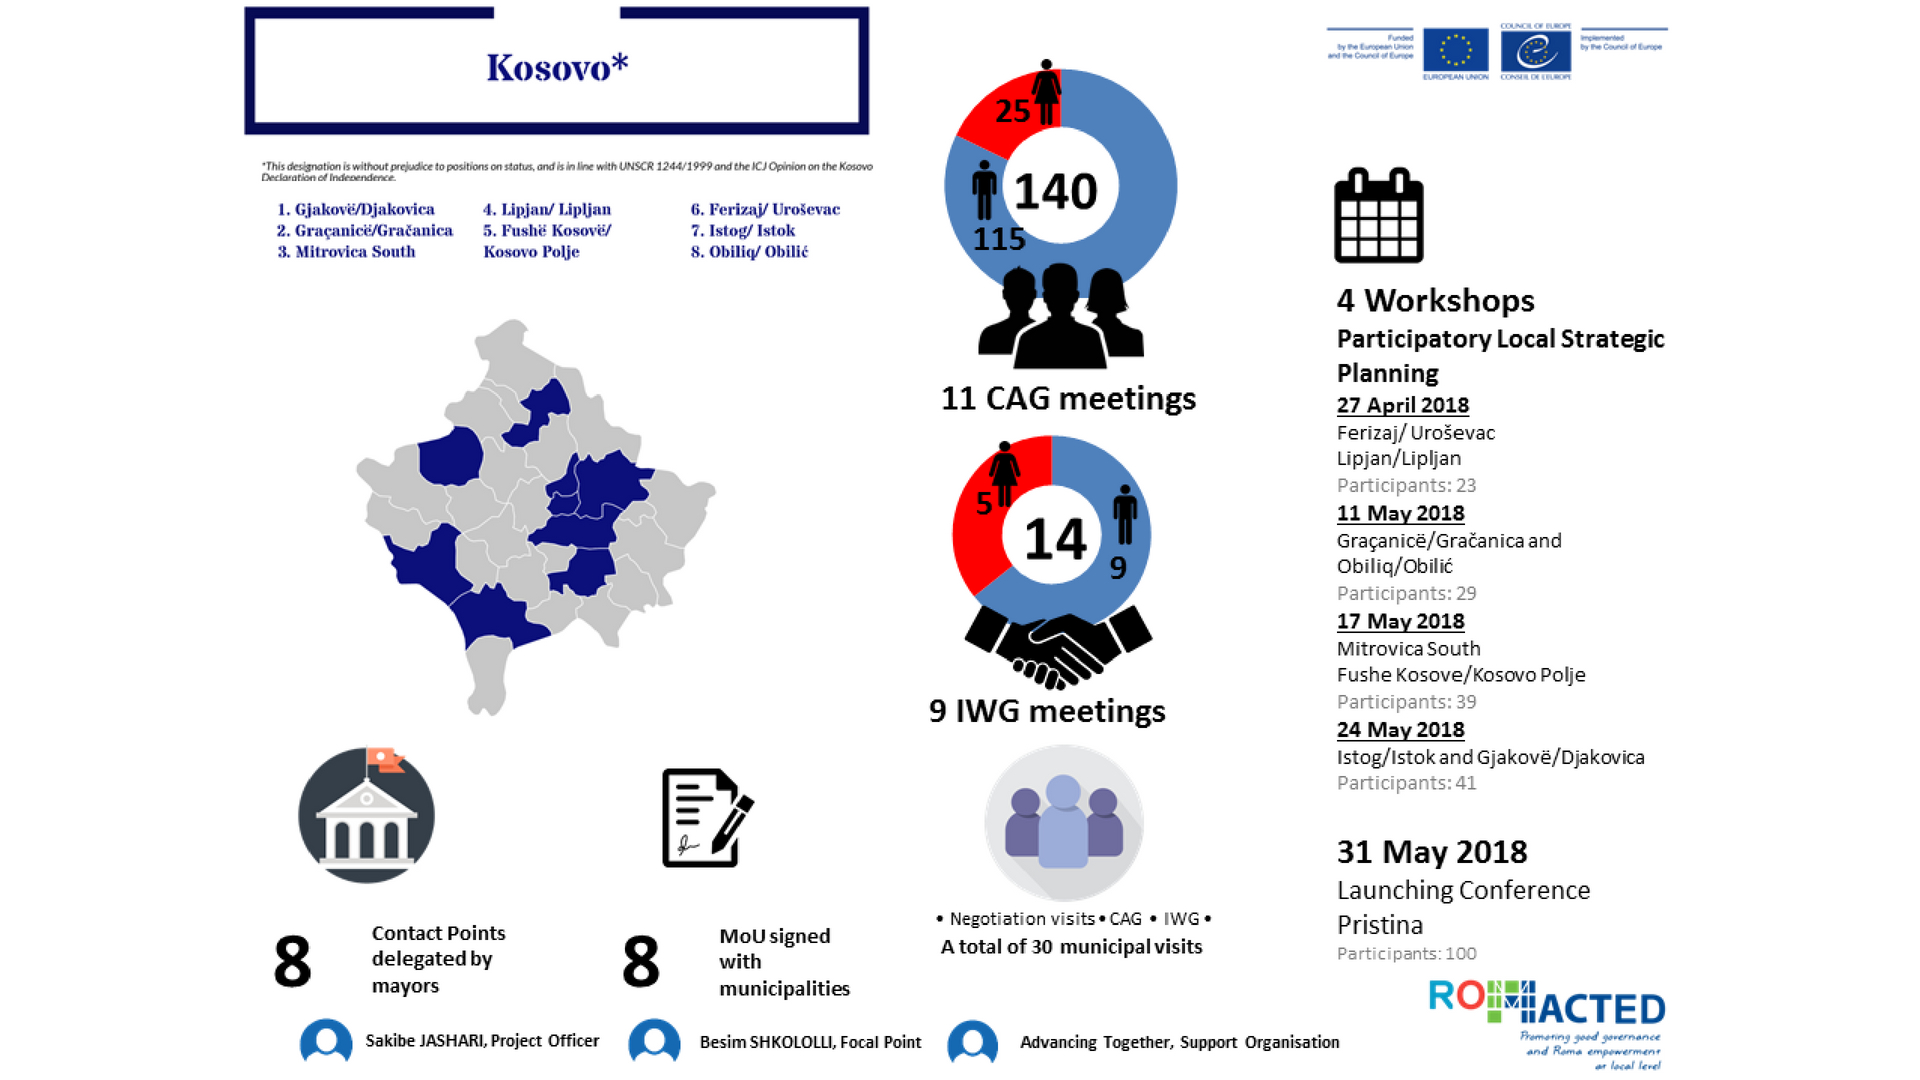 Info graphic summarizes developments of the first six-month implementation in 2018 in Kosovo*